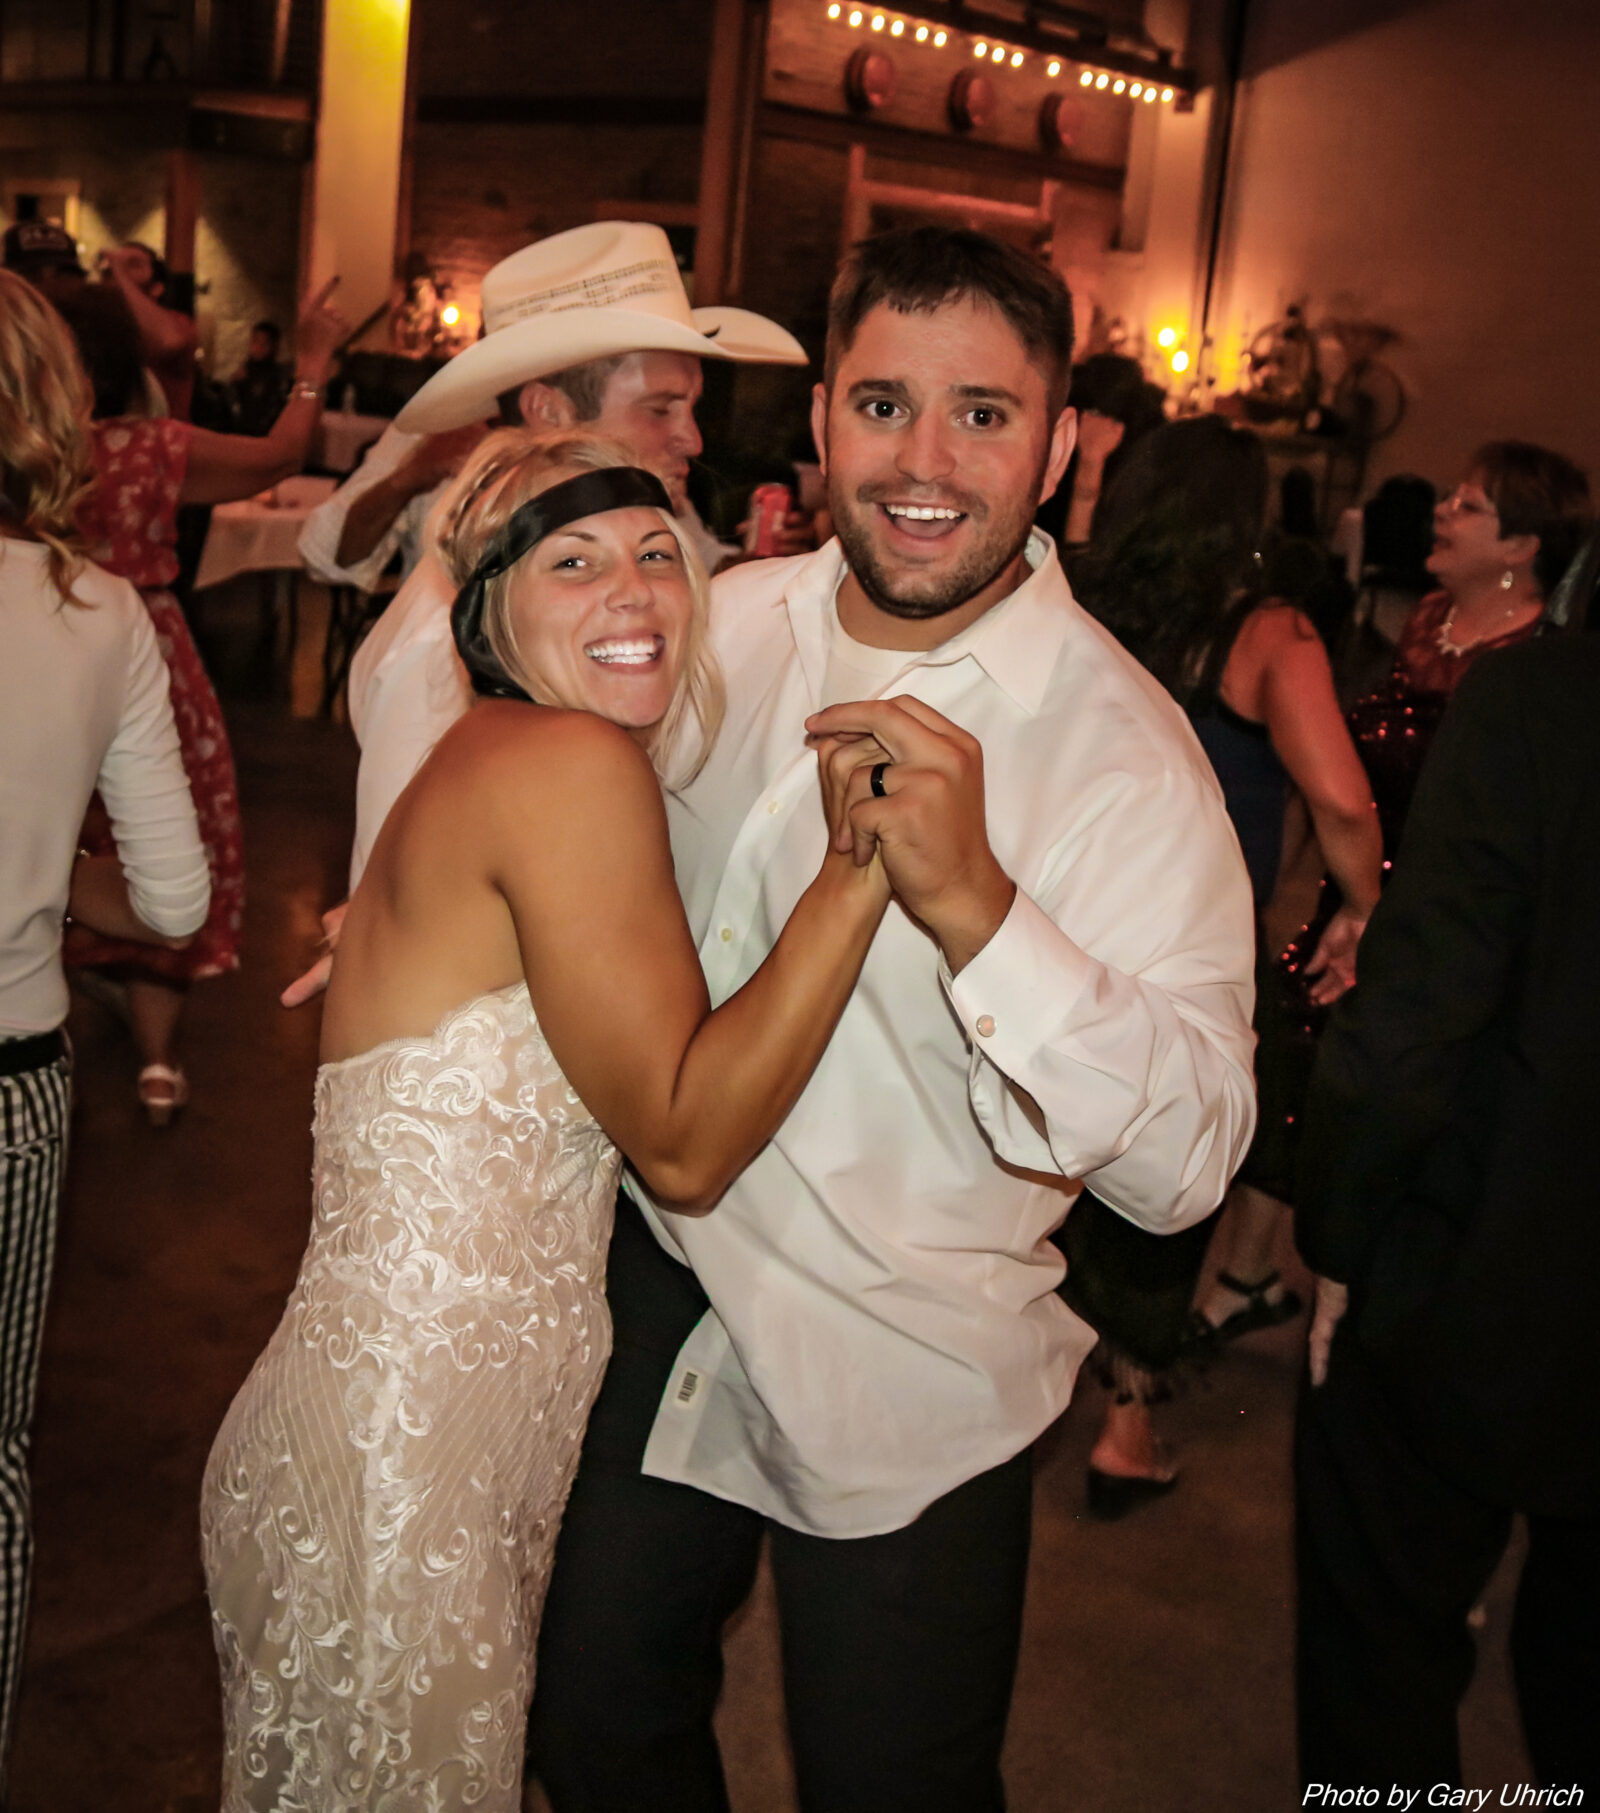 Wedding Reception The DJ Music System Last Song of the Night Bride and Groom Happy Having Fun